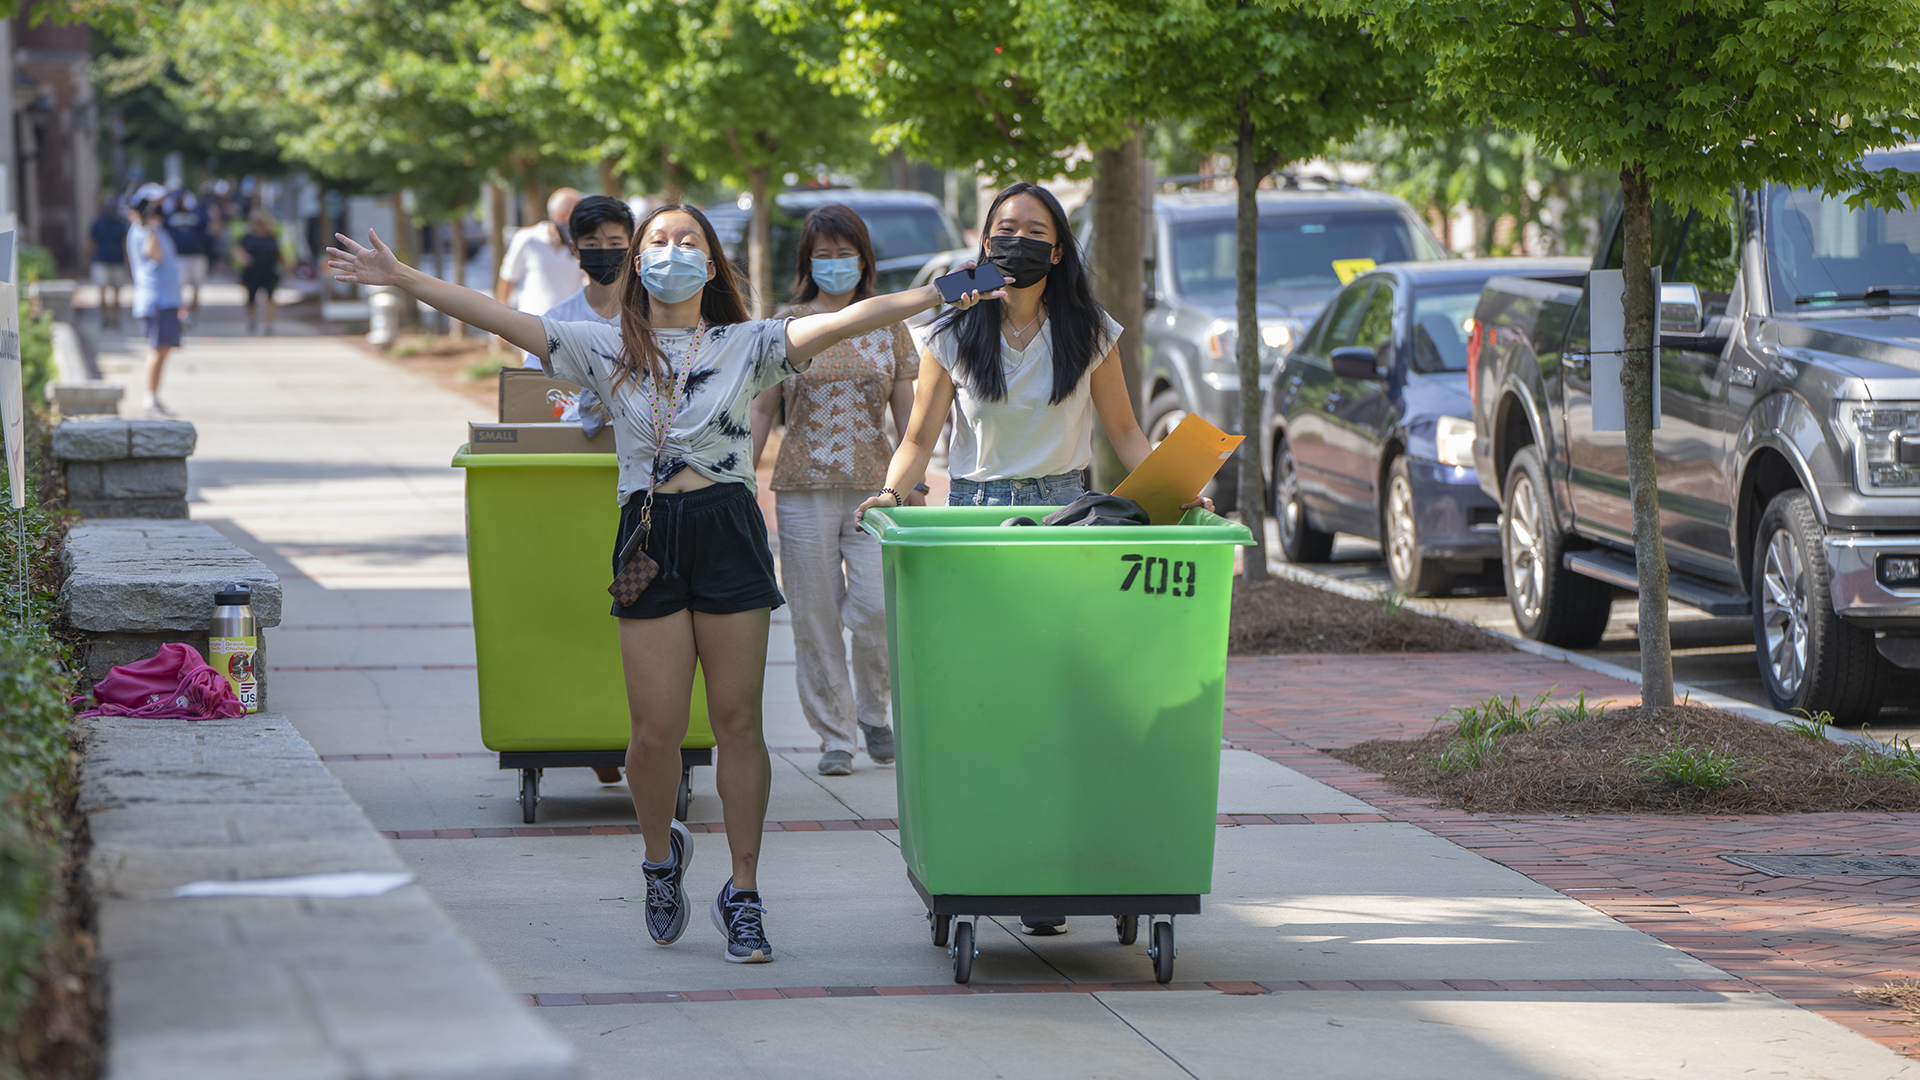 Happy students push a bin of belongings toward their on-campus home for the 2020-21 academic year during move-in weekend for first-year students. (Photo: Christopher Moore)